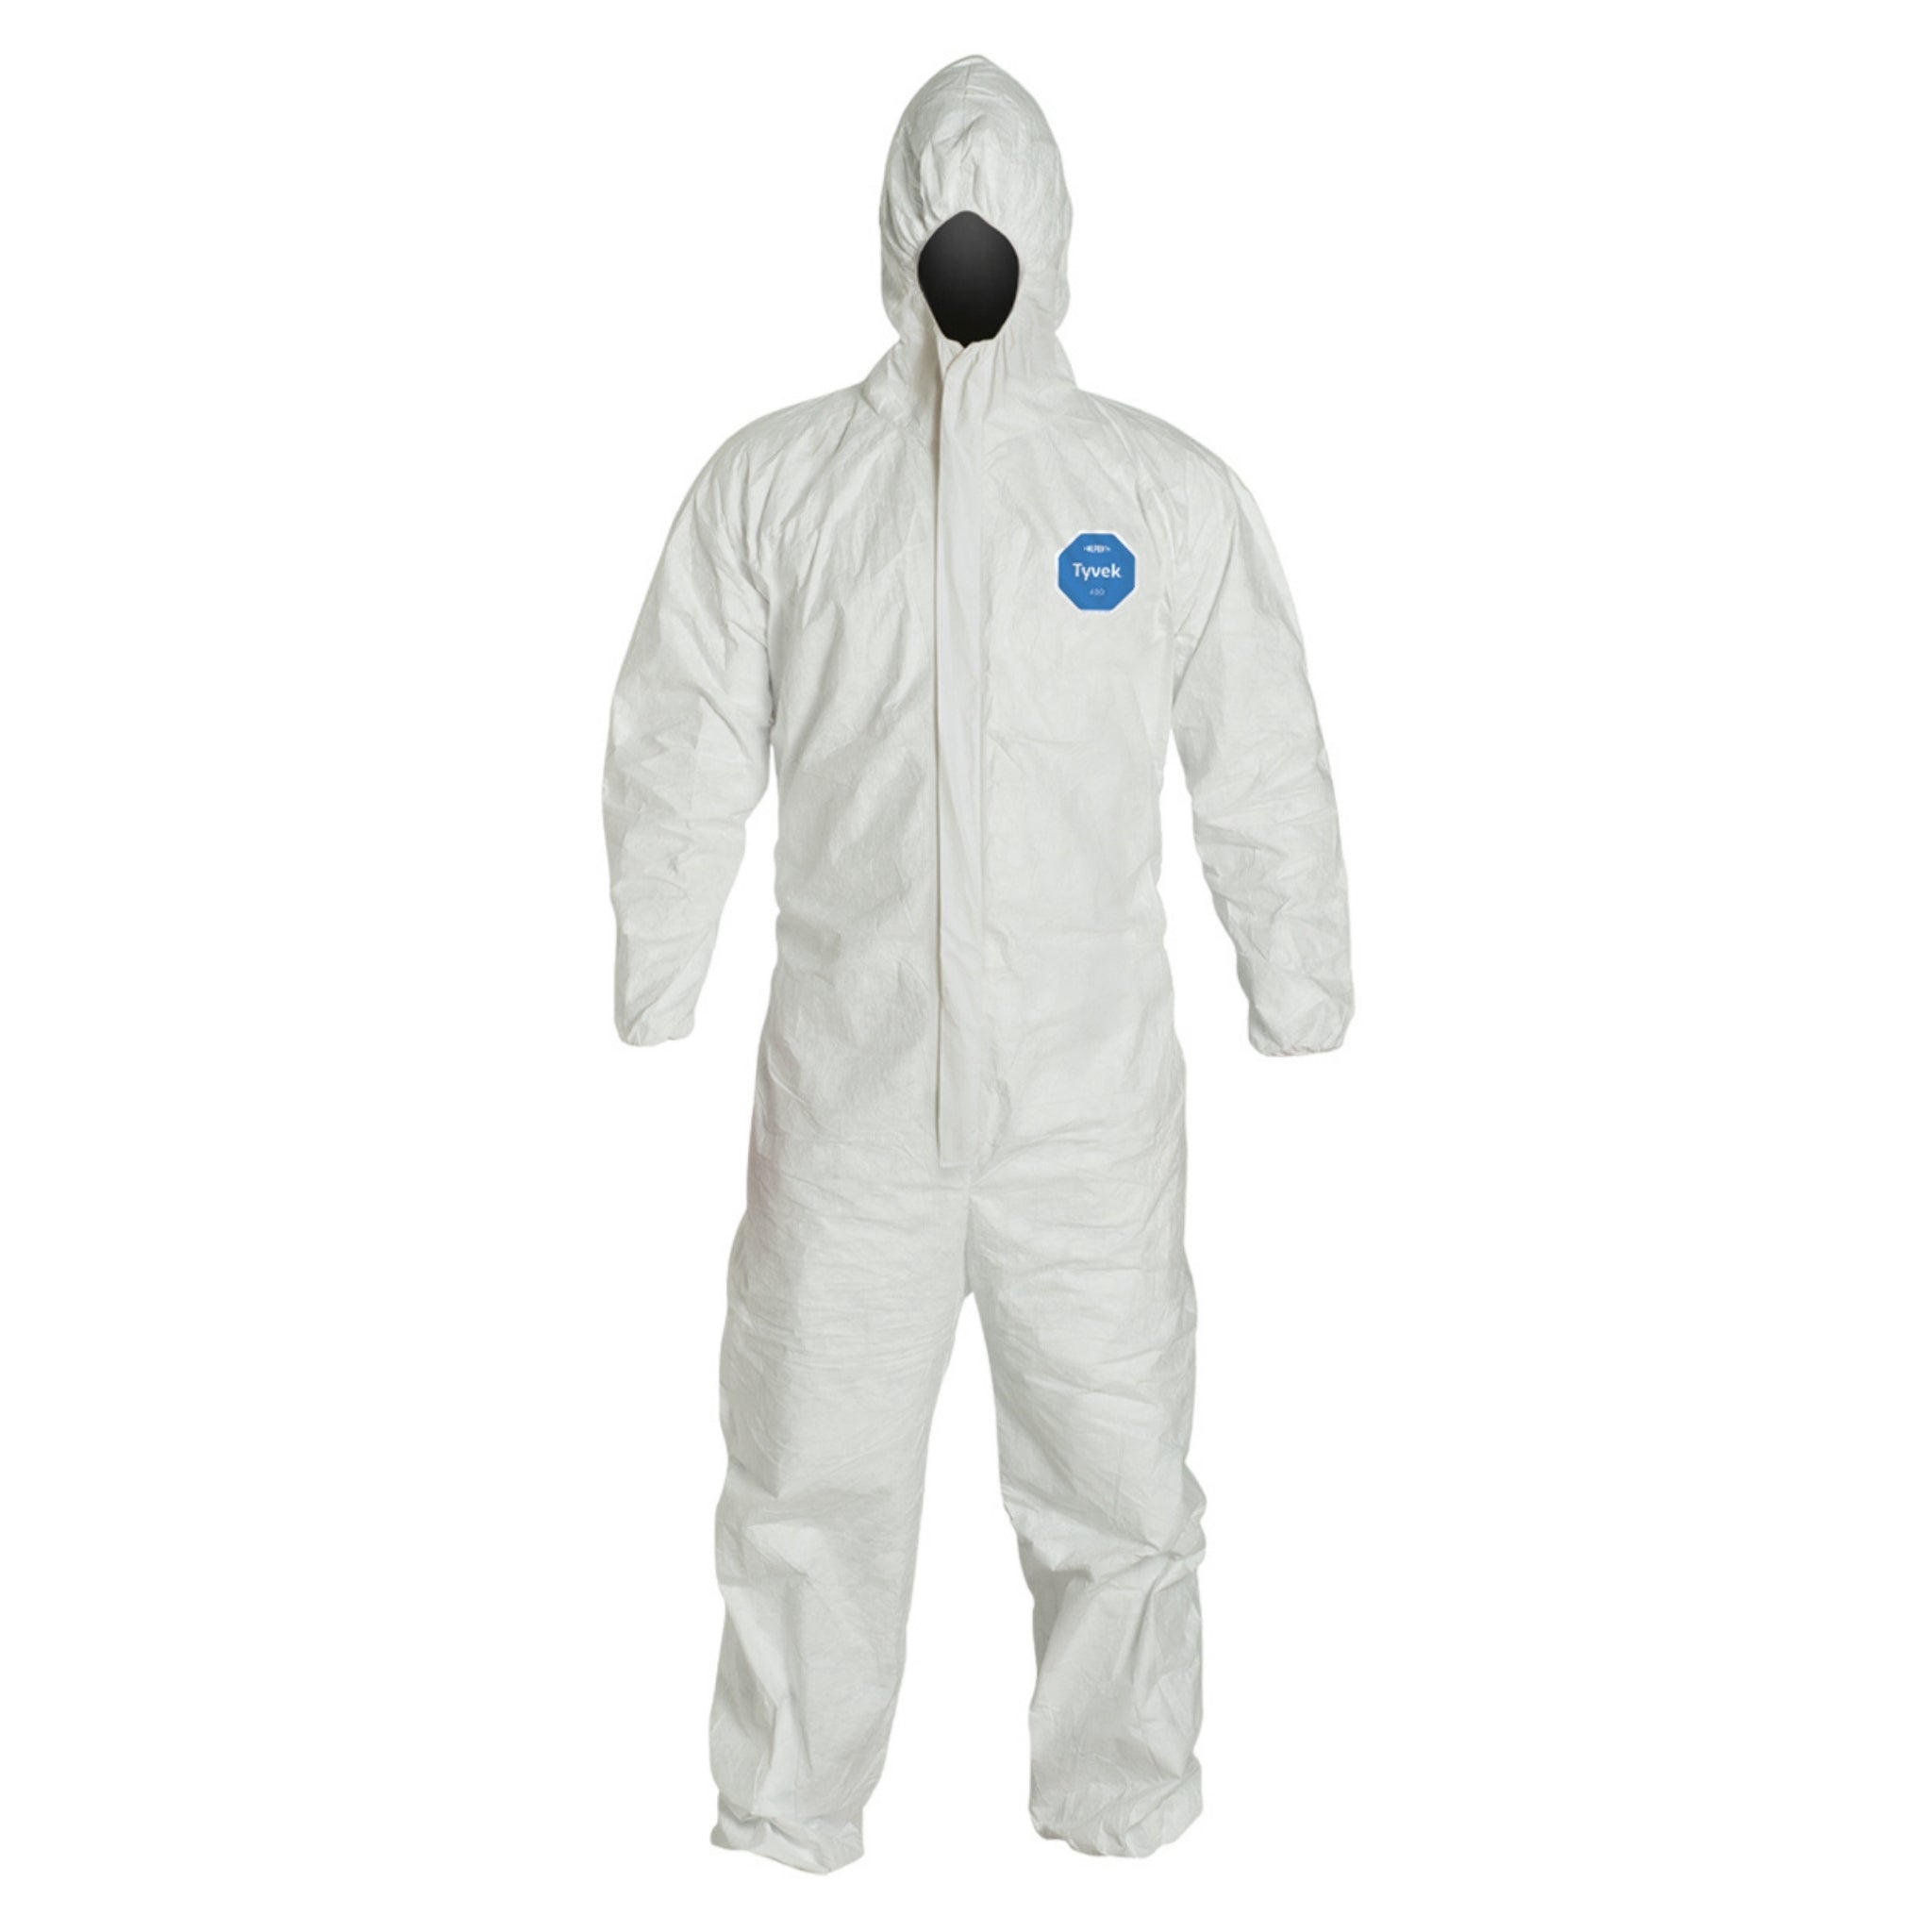 DuPont TY127S- 1 Suit: Tyvek 400  Disposable Protective Coverall, White